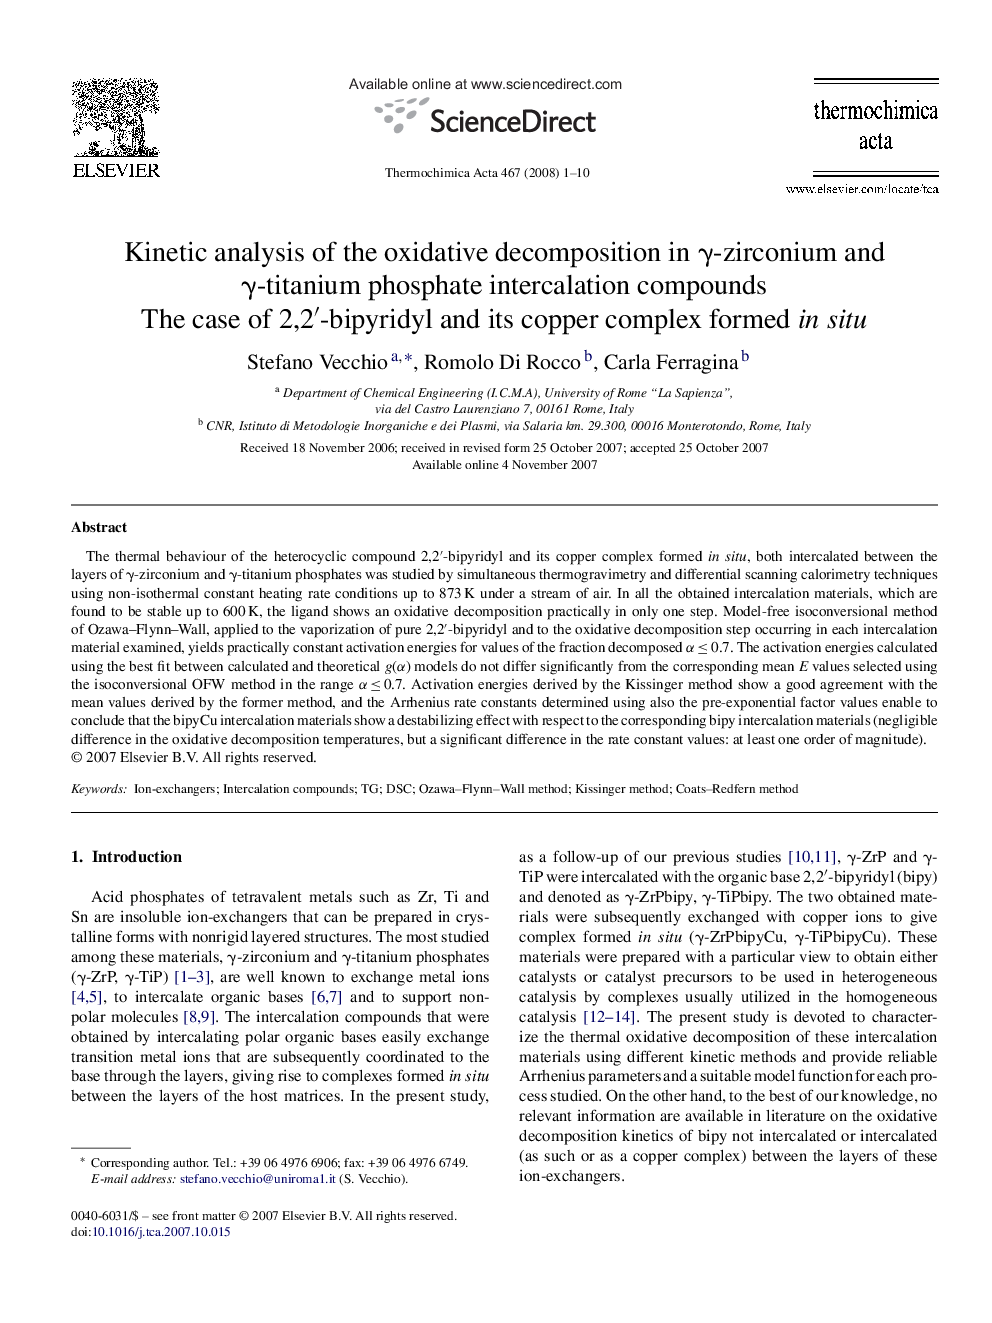 Kinetic analysis of the oxidative decomposition in γ-zirconium and γ-titanium phosphate intercalation compounds: The case of 2,2′-bipyridyl and its copper complex formed in situ